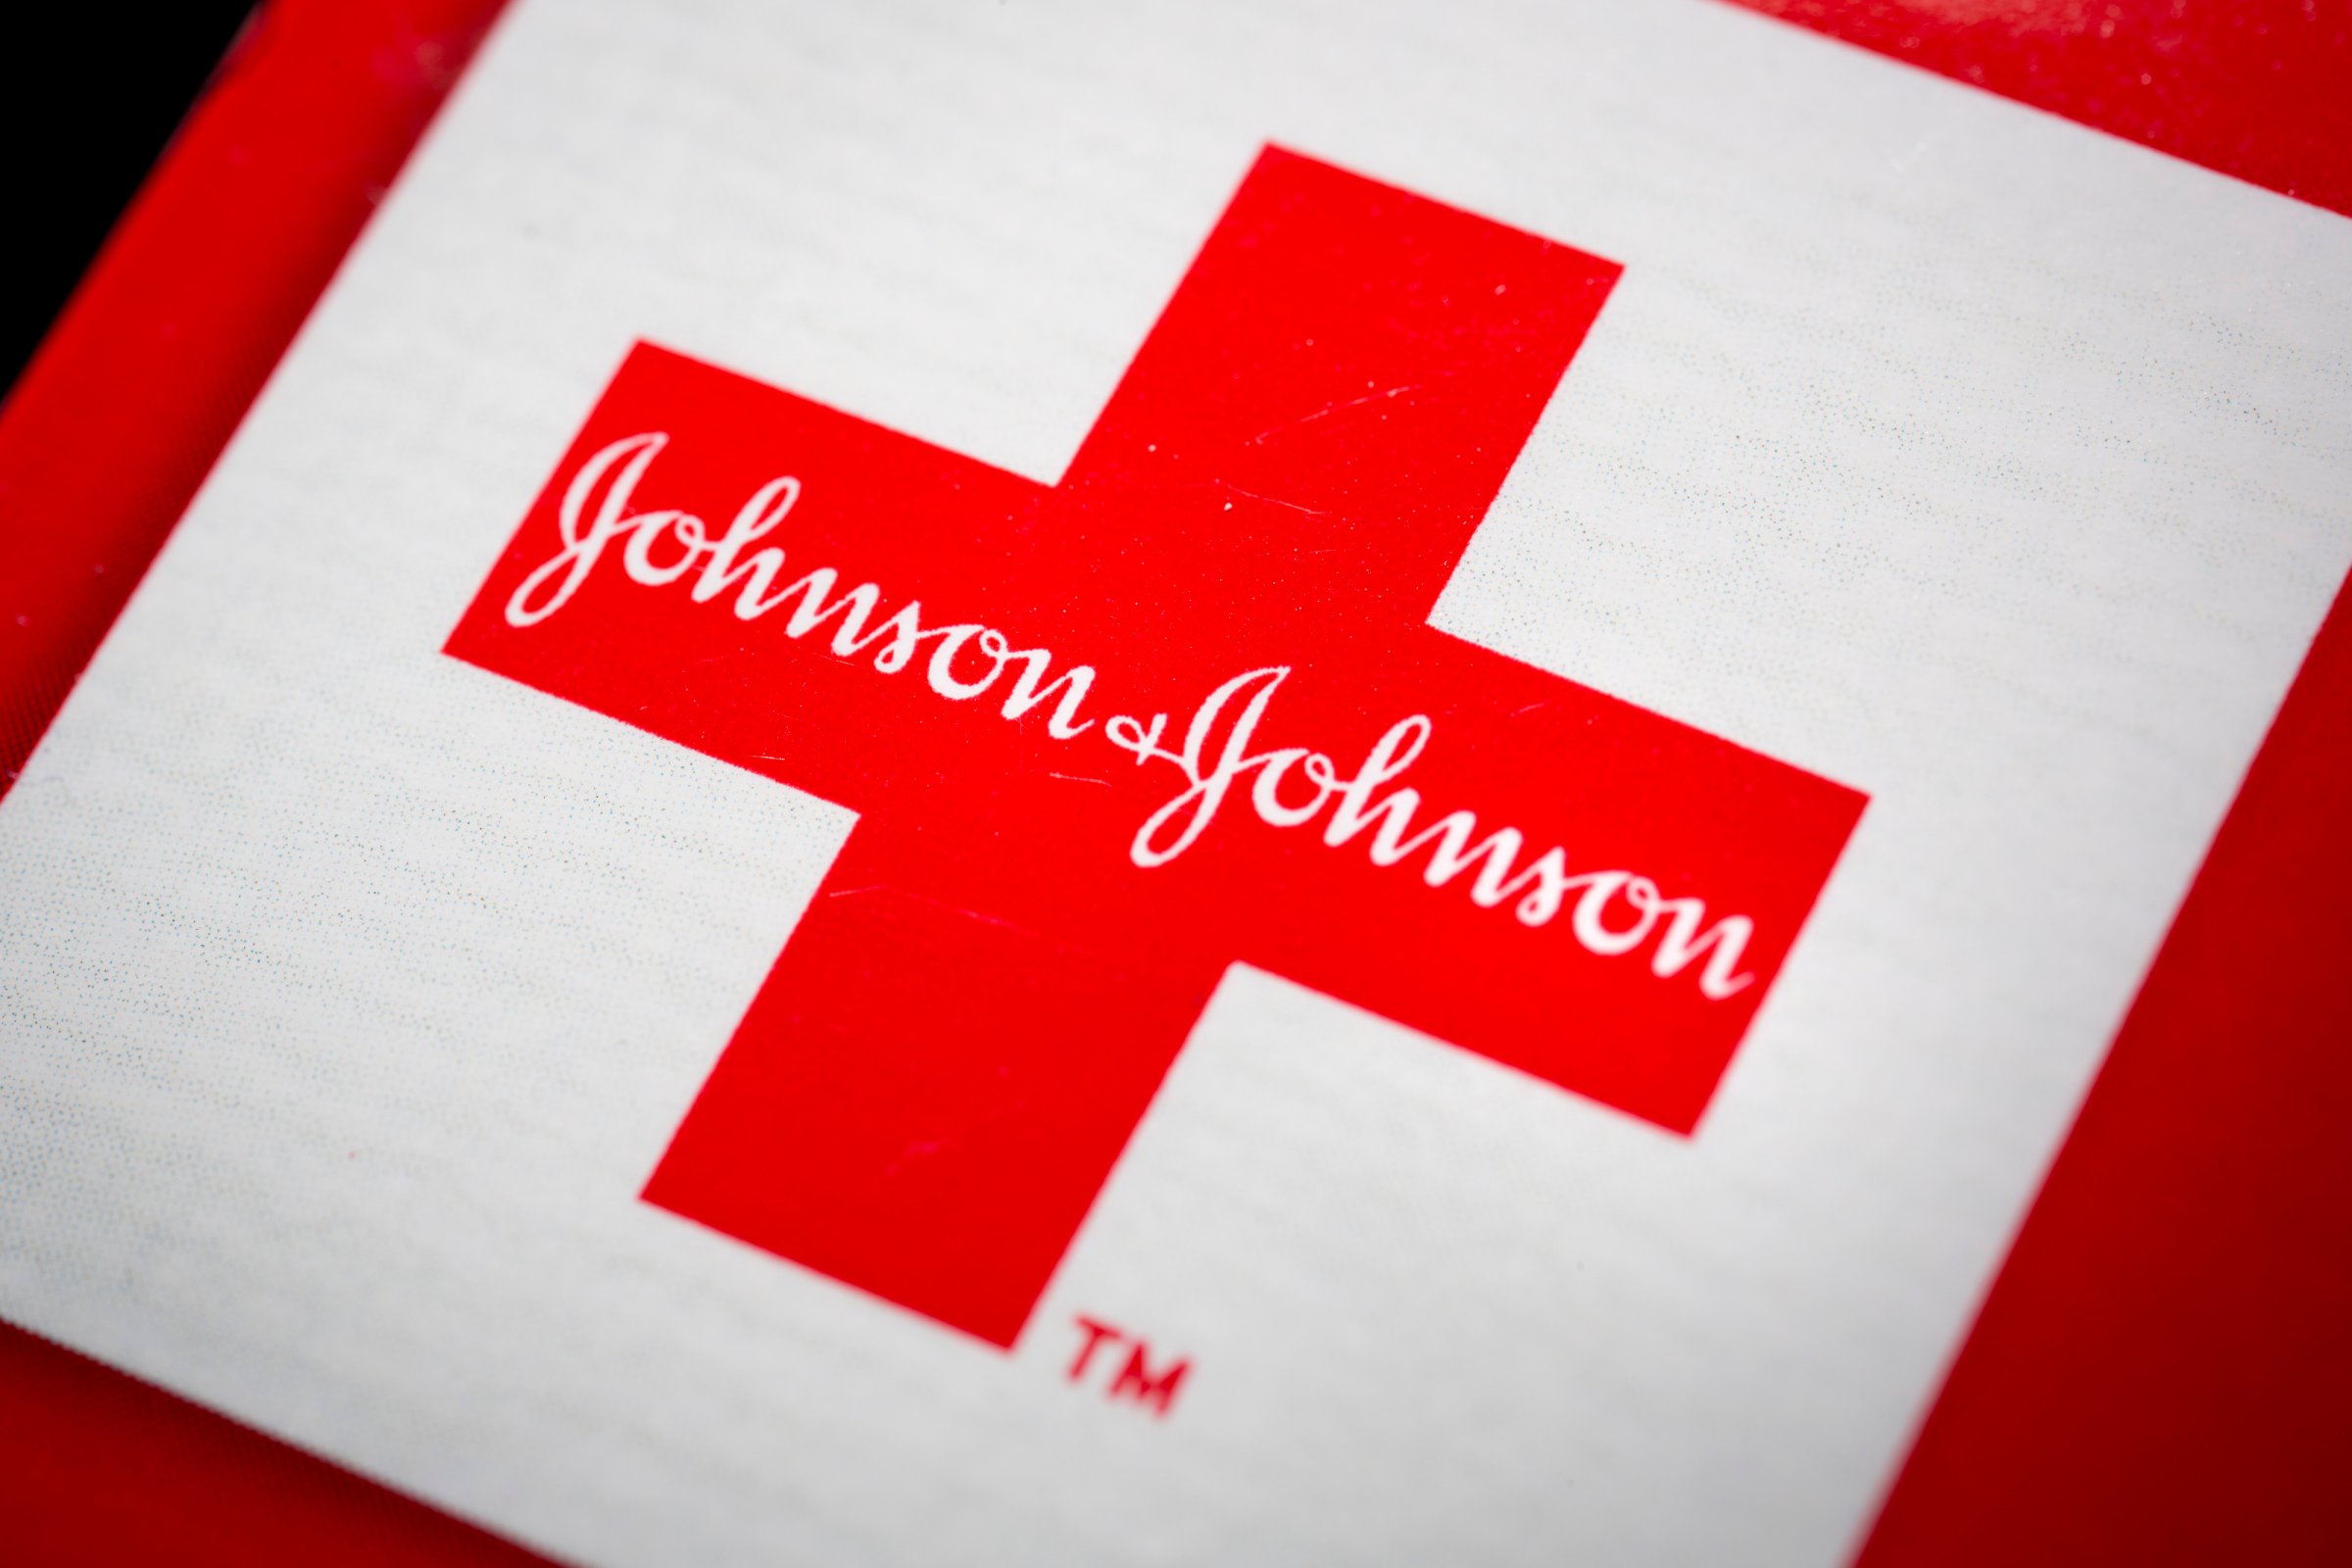 The Johnson & Johnson logo is arranged for a photograph in New York on April 15, 2013.